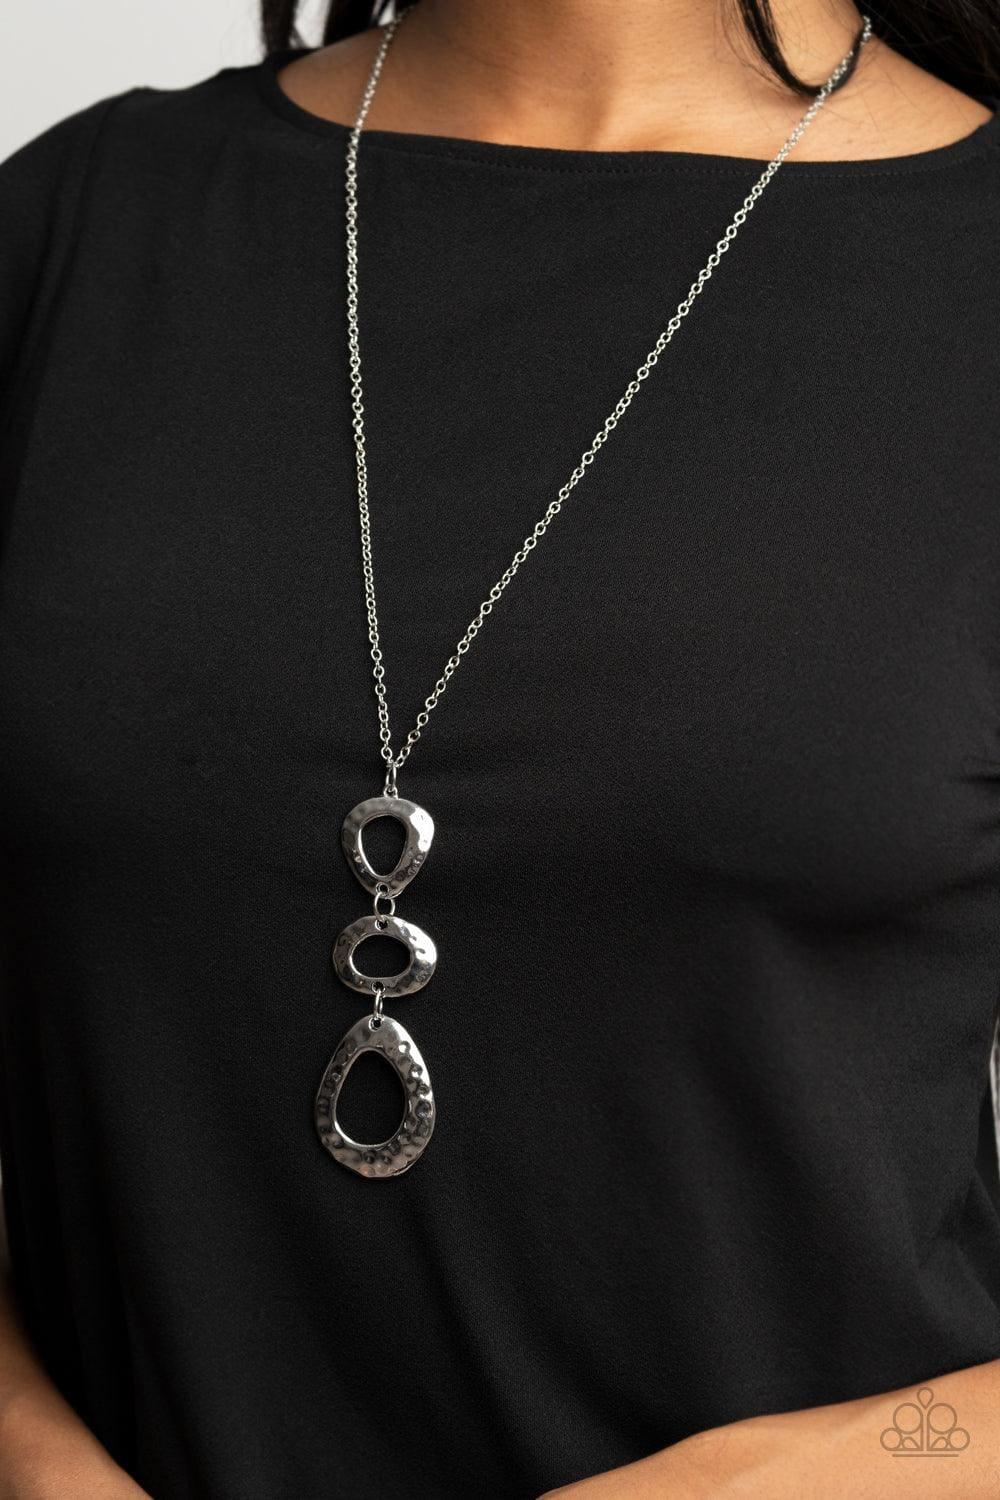 Paparazzi Accessories - Gallery Artisan - Silver Necklace - Bling by JessieK